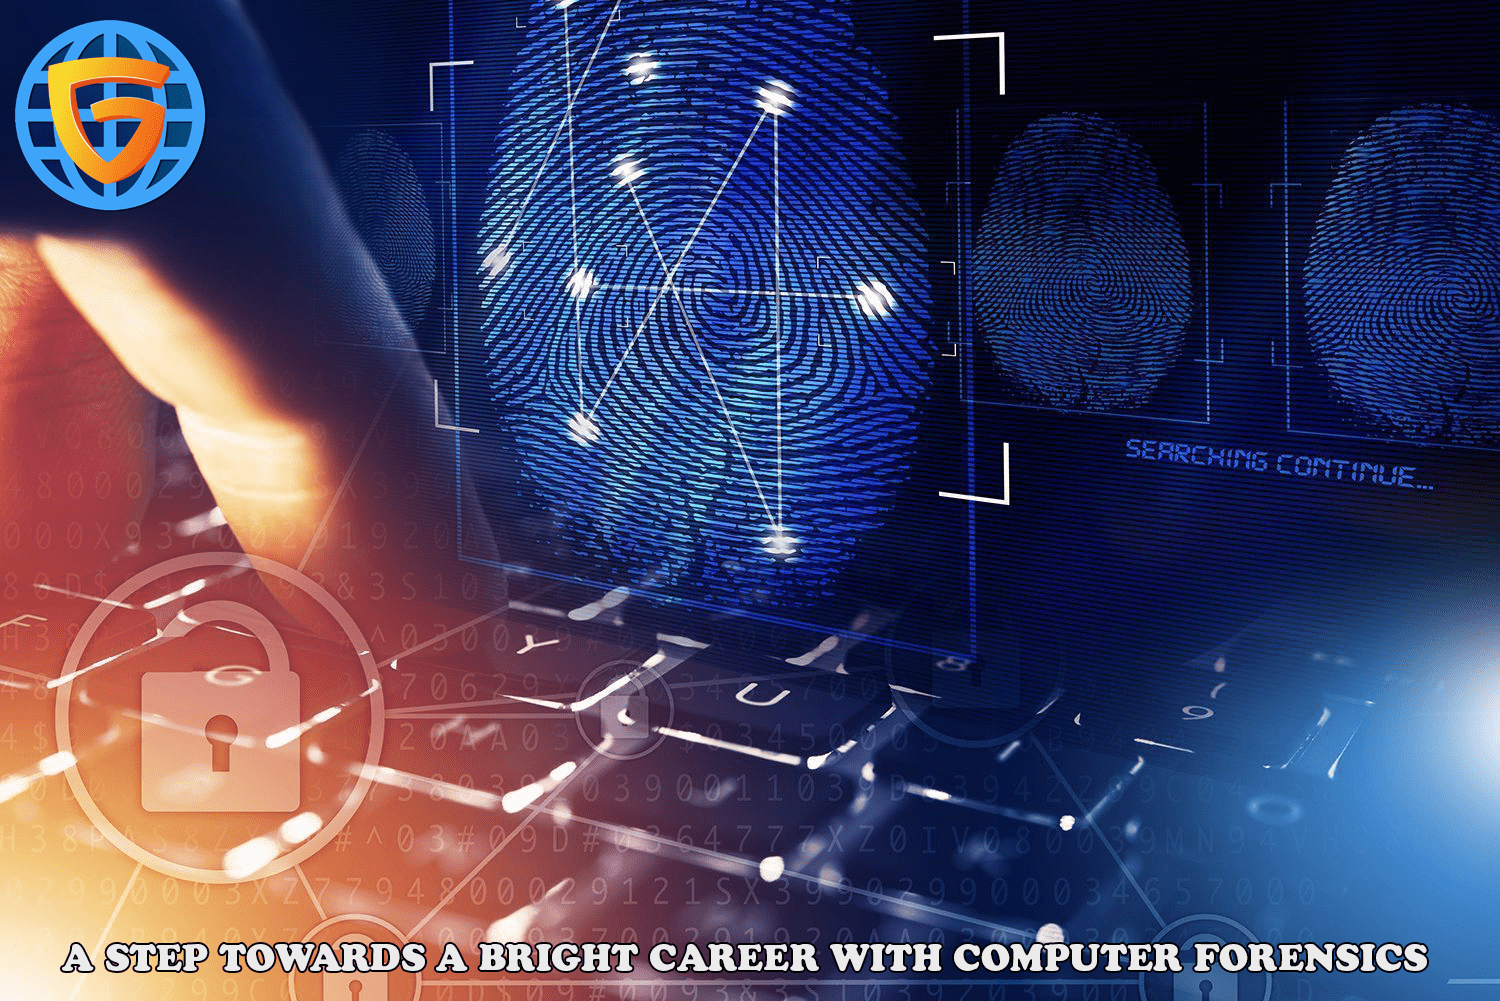 BRIGHT CAREER WITH COMPUTER FORENSICS